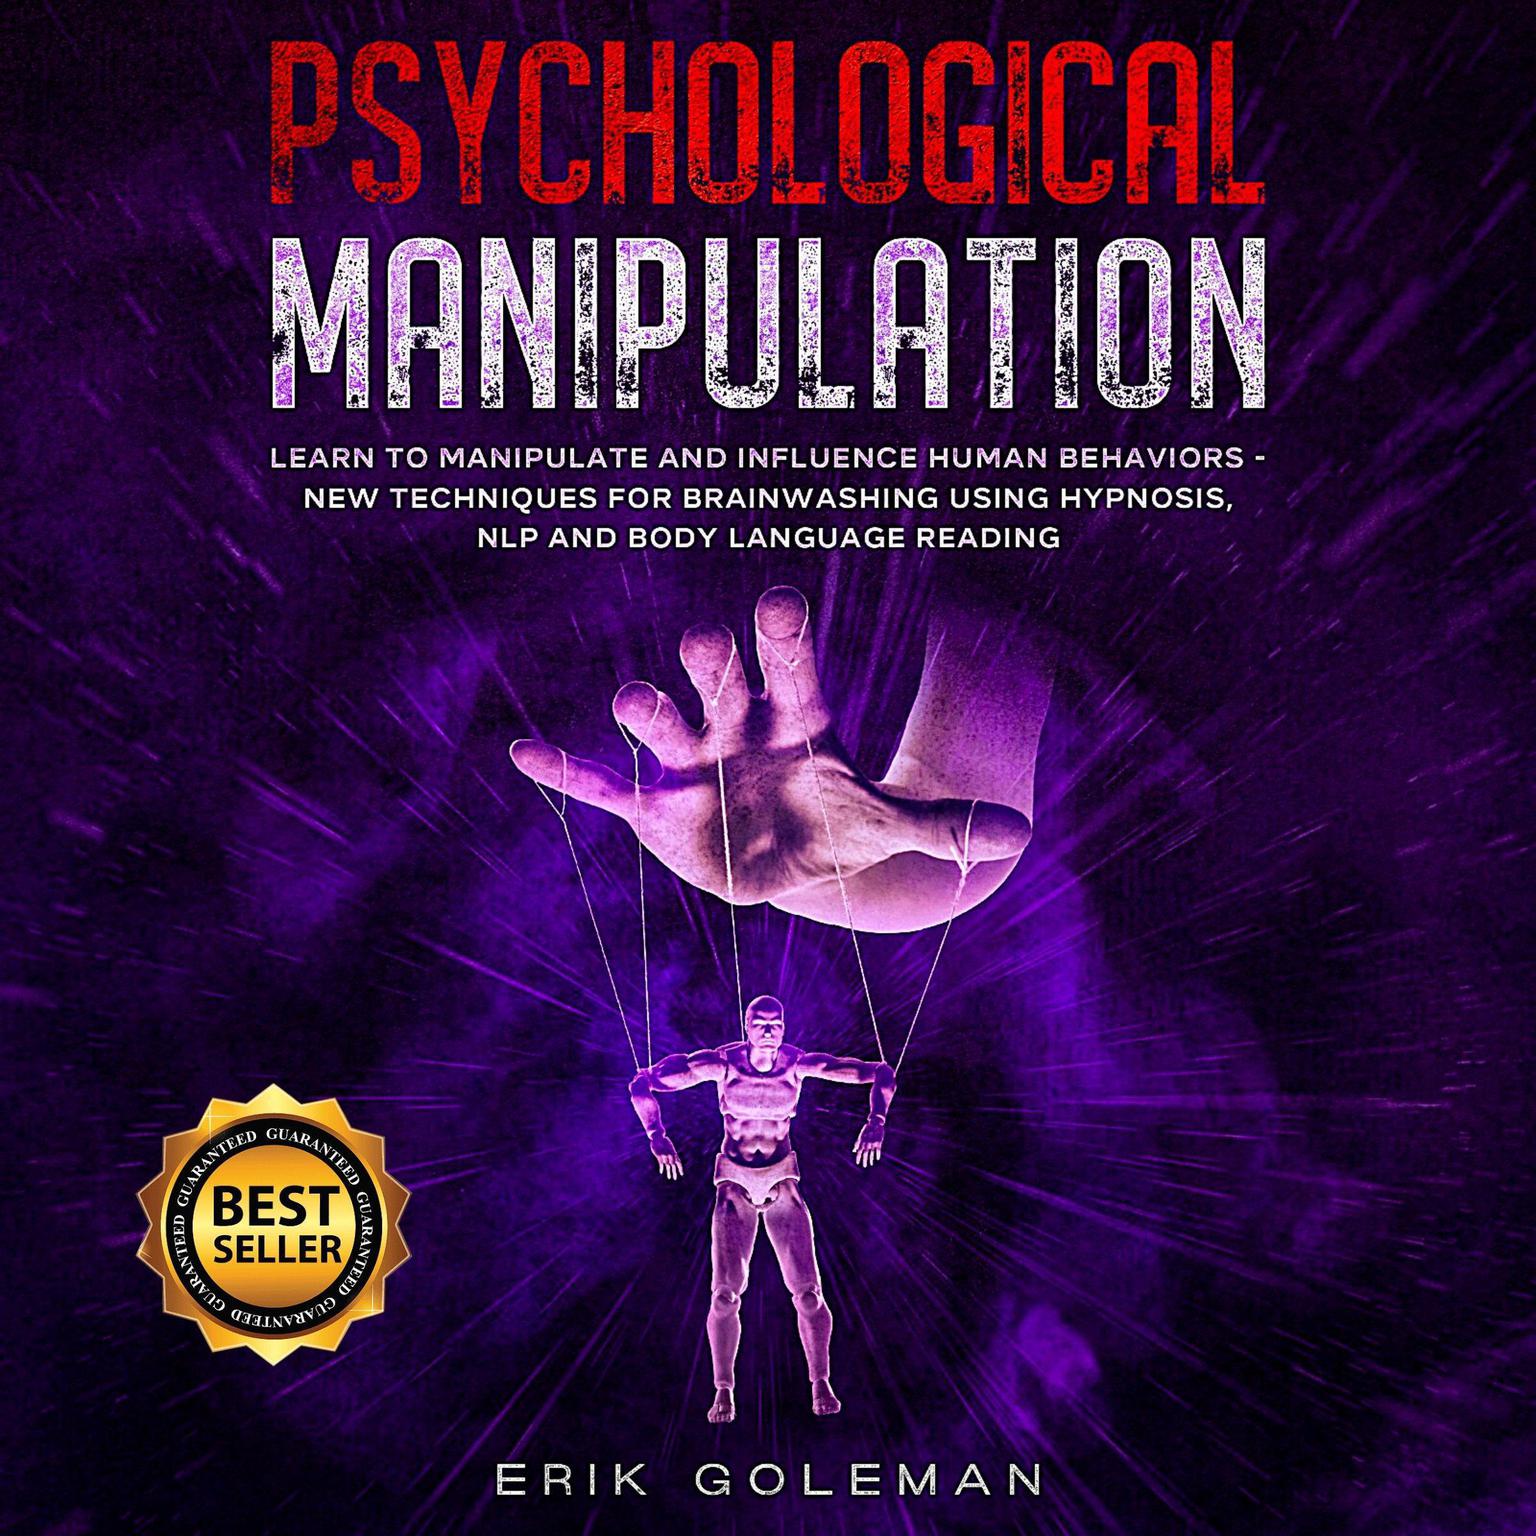 Psychological Manipulation: Learn to Manipulate and Influence Human Behaviors. New Techniques for Brainwashing Using Hypnosis, NLP and Body Language Reading Audiobook, by Erik Goleman